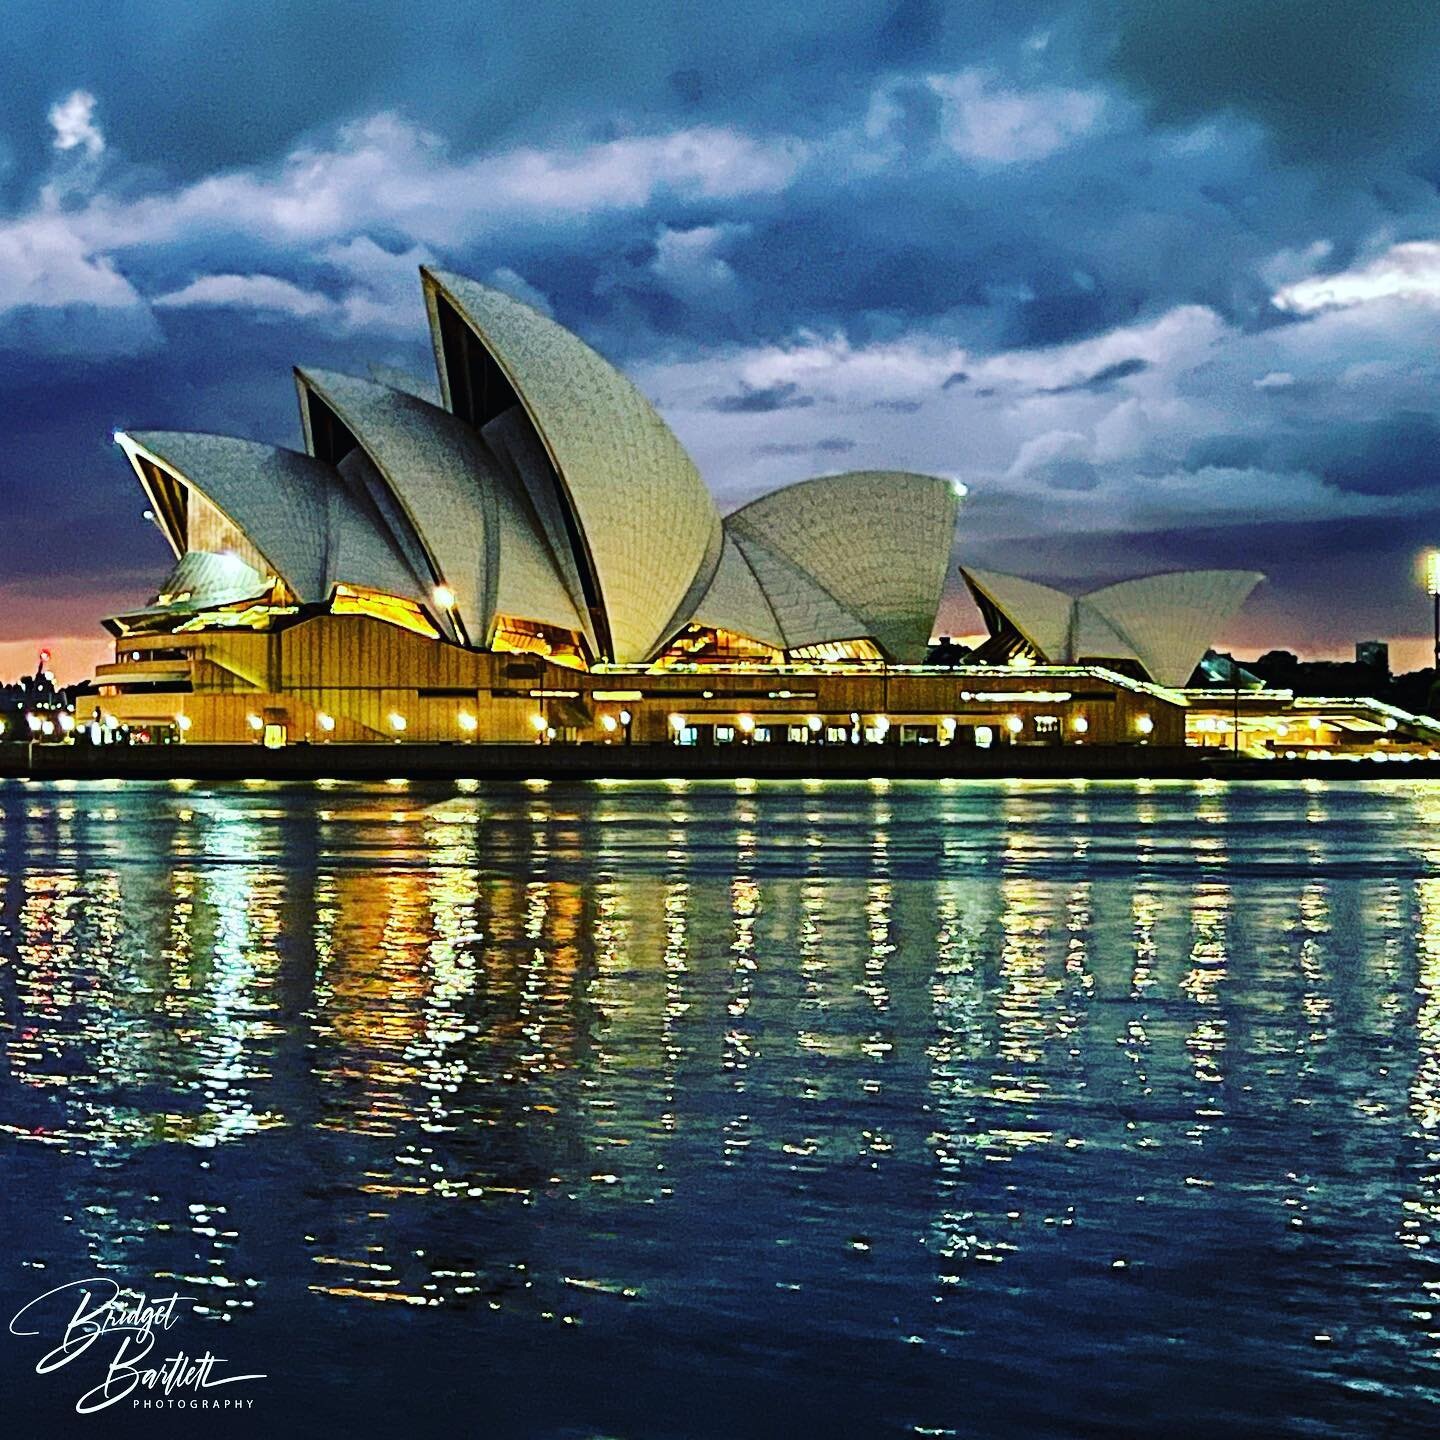 Rise and shine, Sydney! ☀️ Waking up to this stunning sunrise over the Opera House is pure magic ✨ #SydneySunrise #OperaHouseViews #MorningBliss #sydney #operahouse #sunrise #sunrisephotography #landscapephotography #photography #photographer #landsc